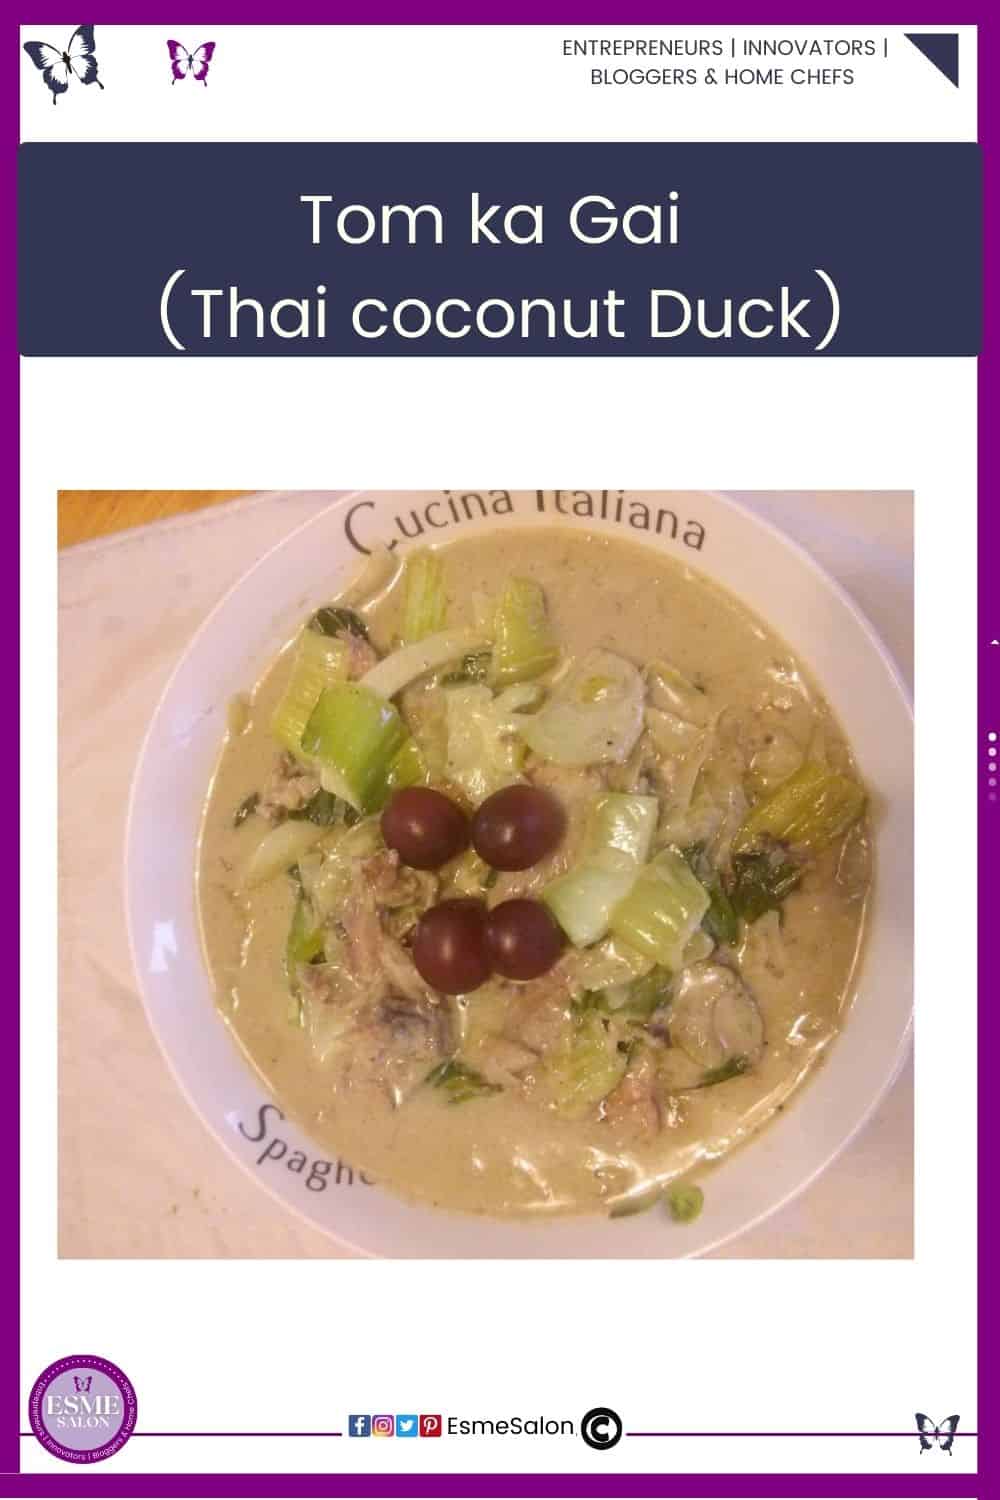 an image of a soup plate filled with Tom ka Gai (Thai coconut Duck) with Thai curry, coconut cream and cilantro